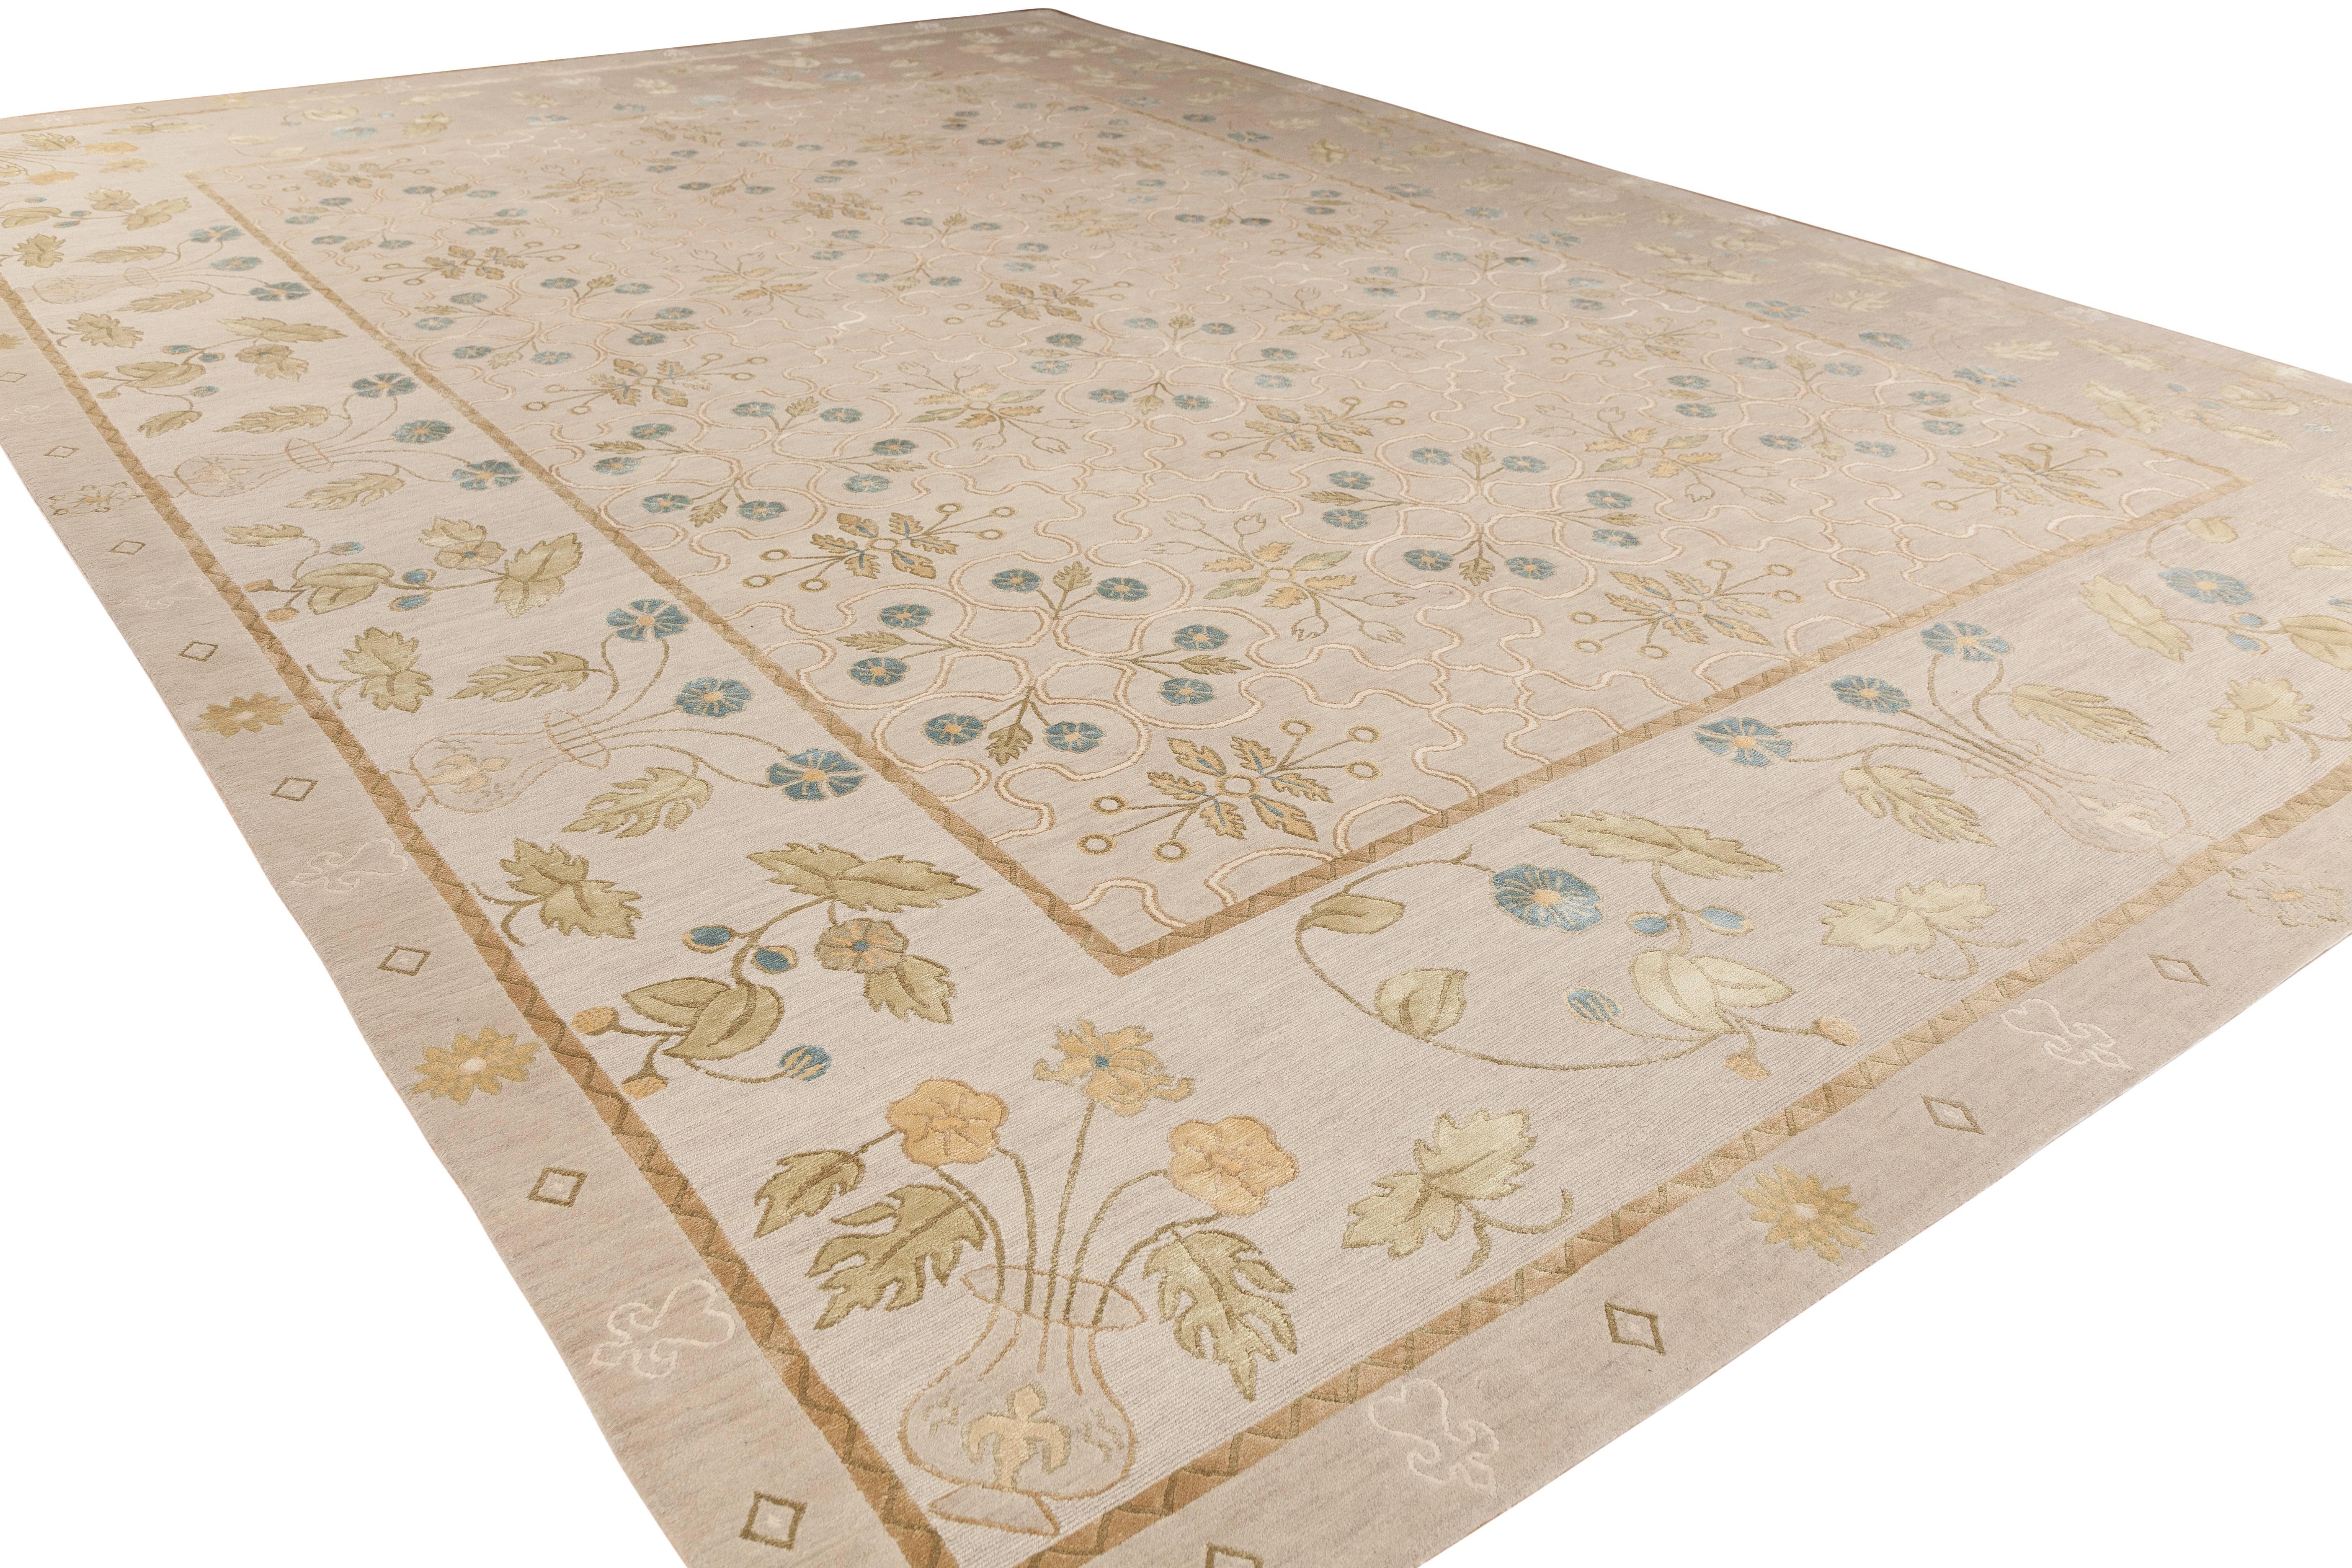 Modern 'Erika, polonaise' Hand-Knotted Tibetan Rug Made in Nepal by New Moon Rugs For Sale